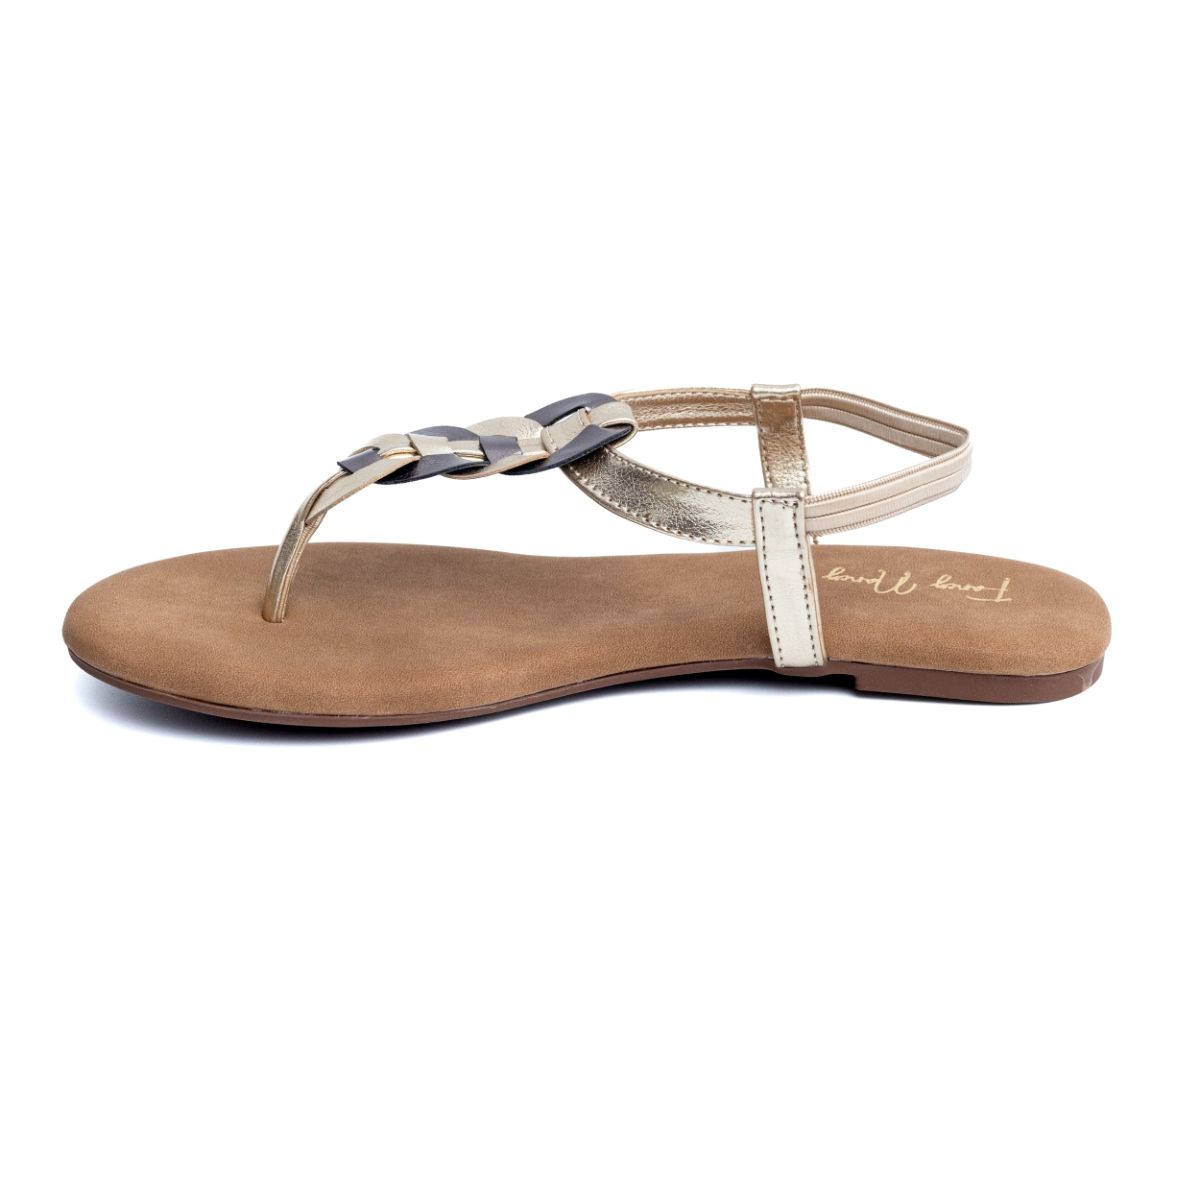 Valentinosity Designer Flat Sandals High Quality Fashion Laines London  Slippers For Women, Classic Slide Style, Luxury Leisure Flip Flops H107  From Dhs001, $95.48 | DHgate.Com